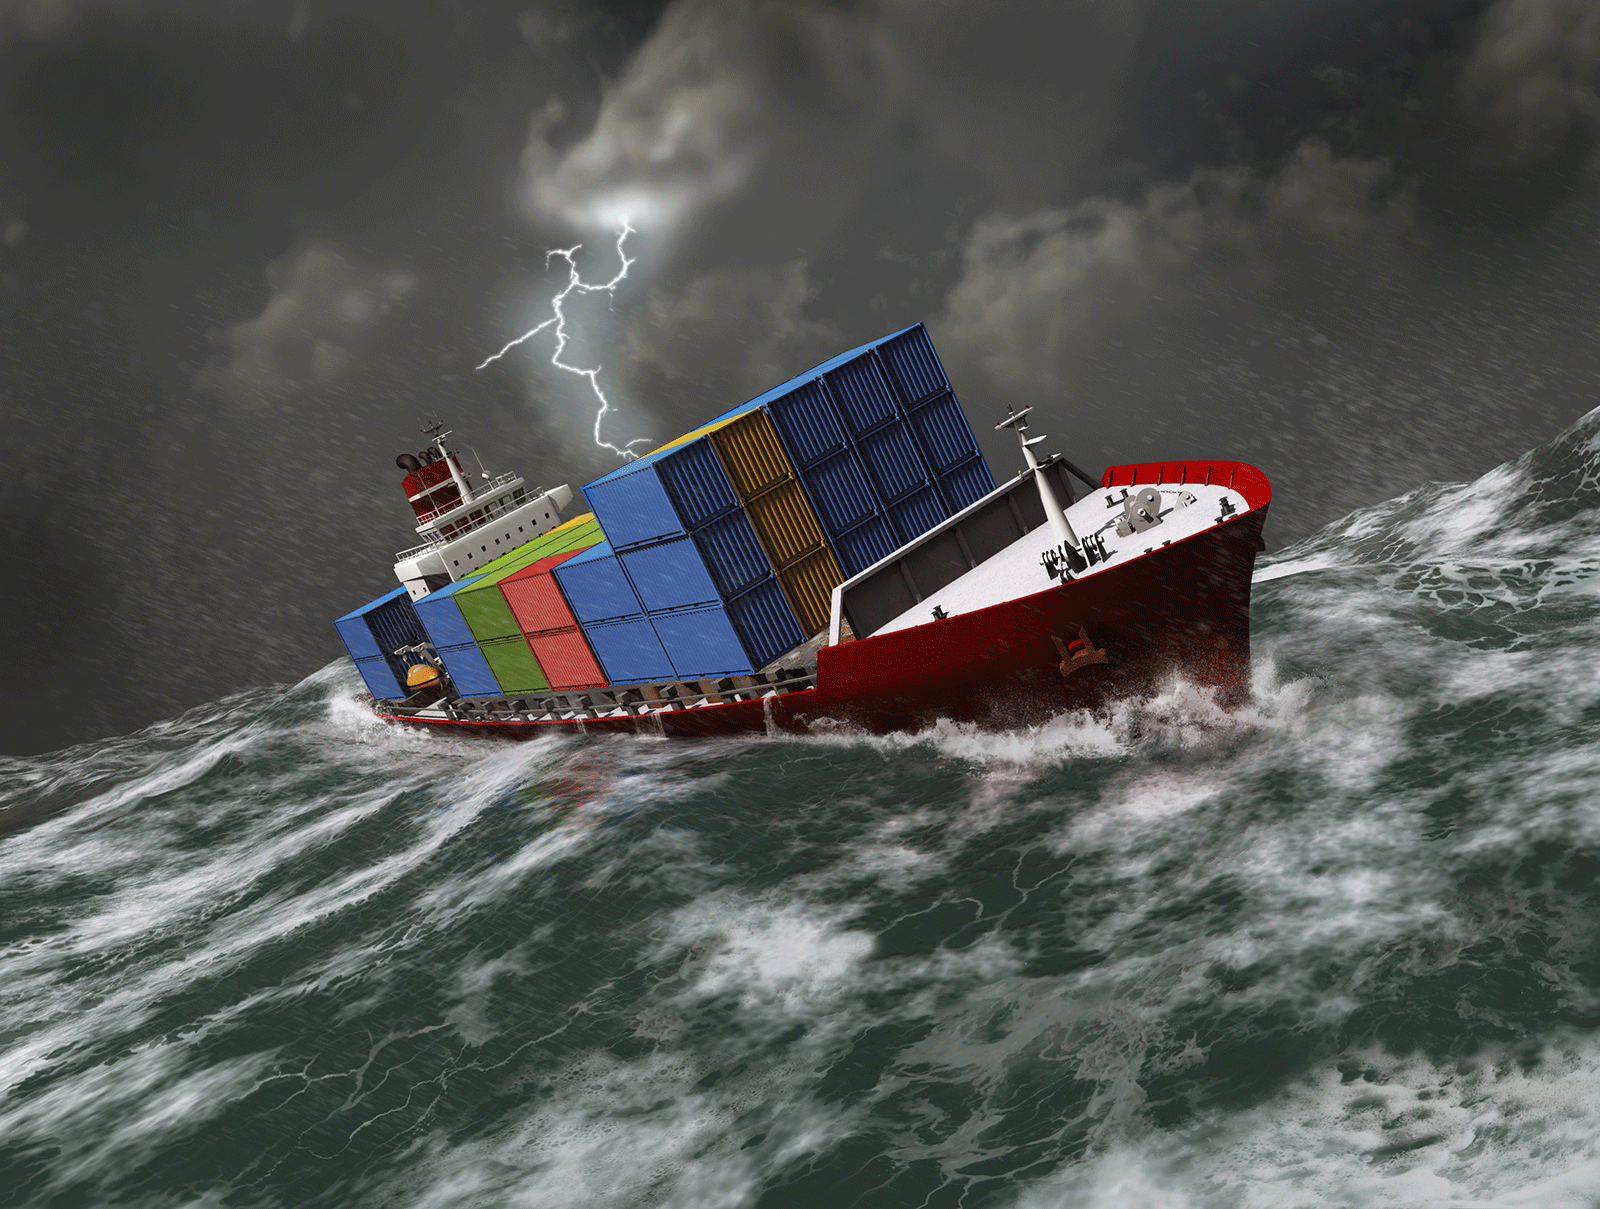 Why are containers lost at sea?